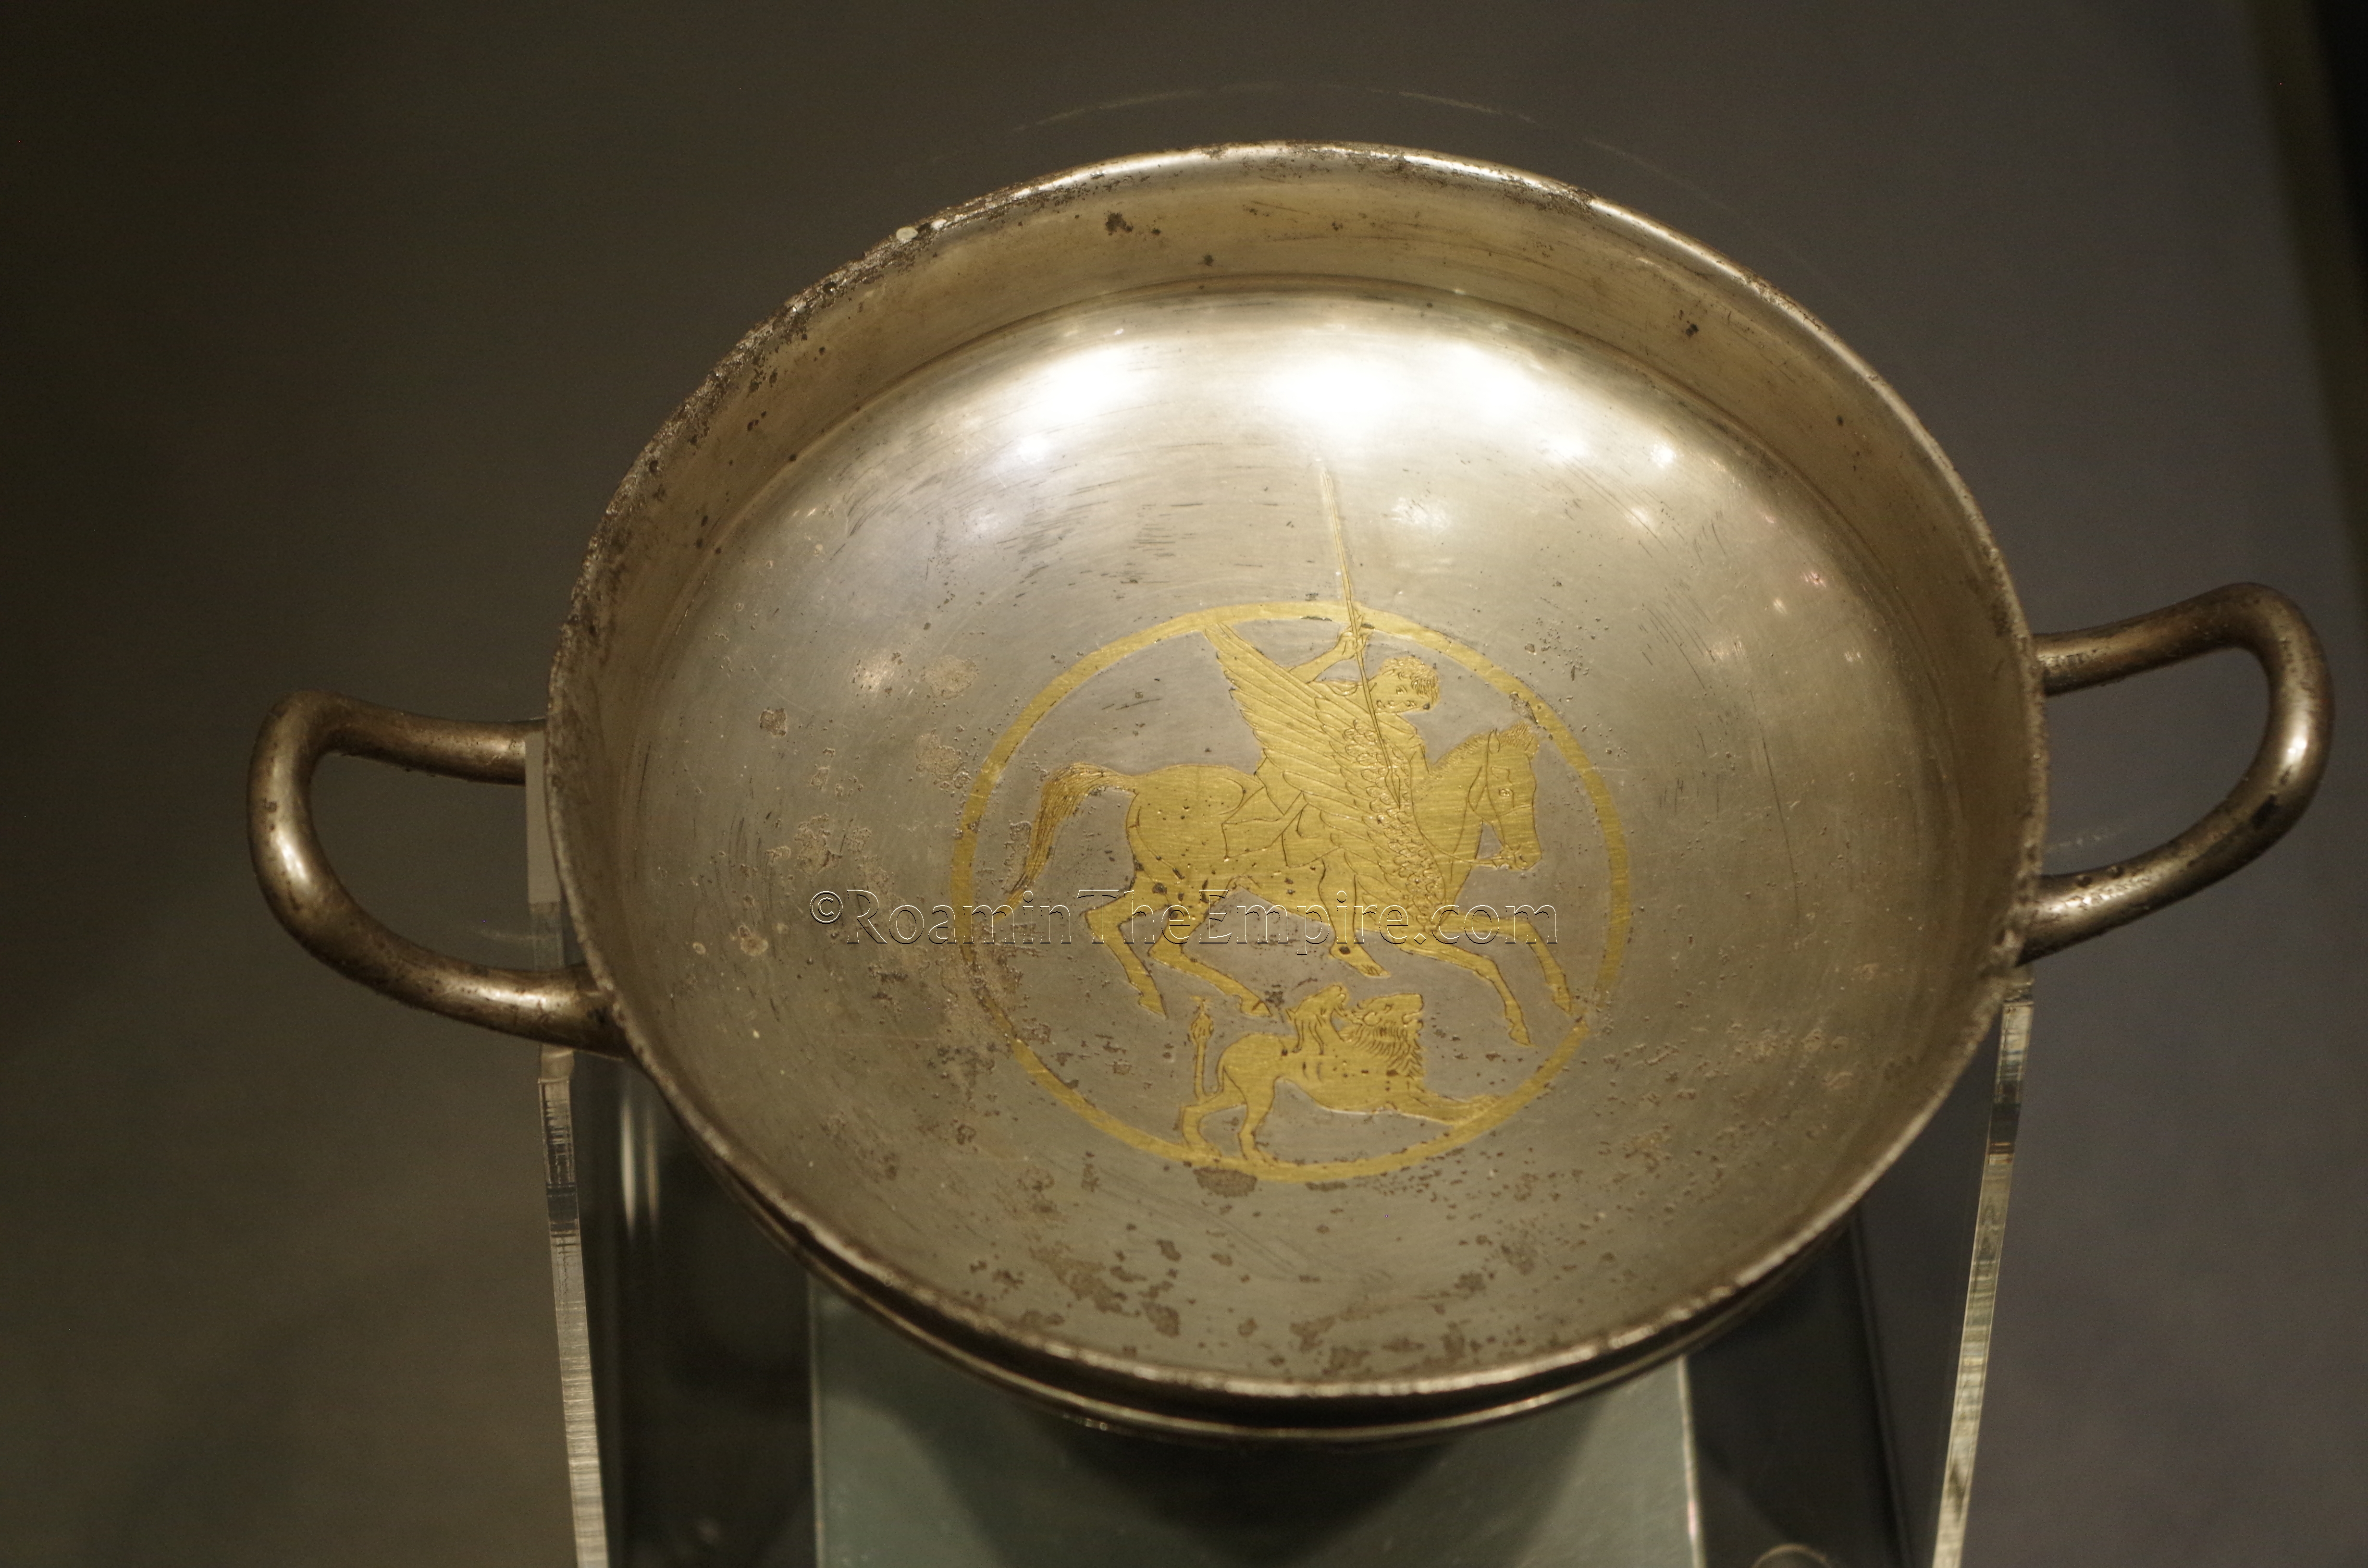 Silver and gilt kylix with Bellerophon atop Pegasus, fighting the Chimera. From a 5th century BCE Thracian tomb at Chernozem. Regional Archaeological Museum.